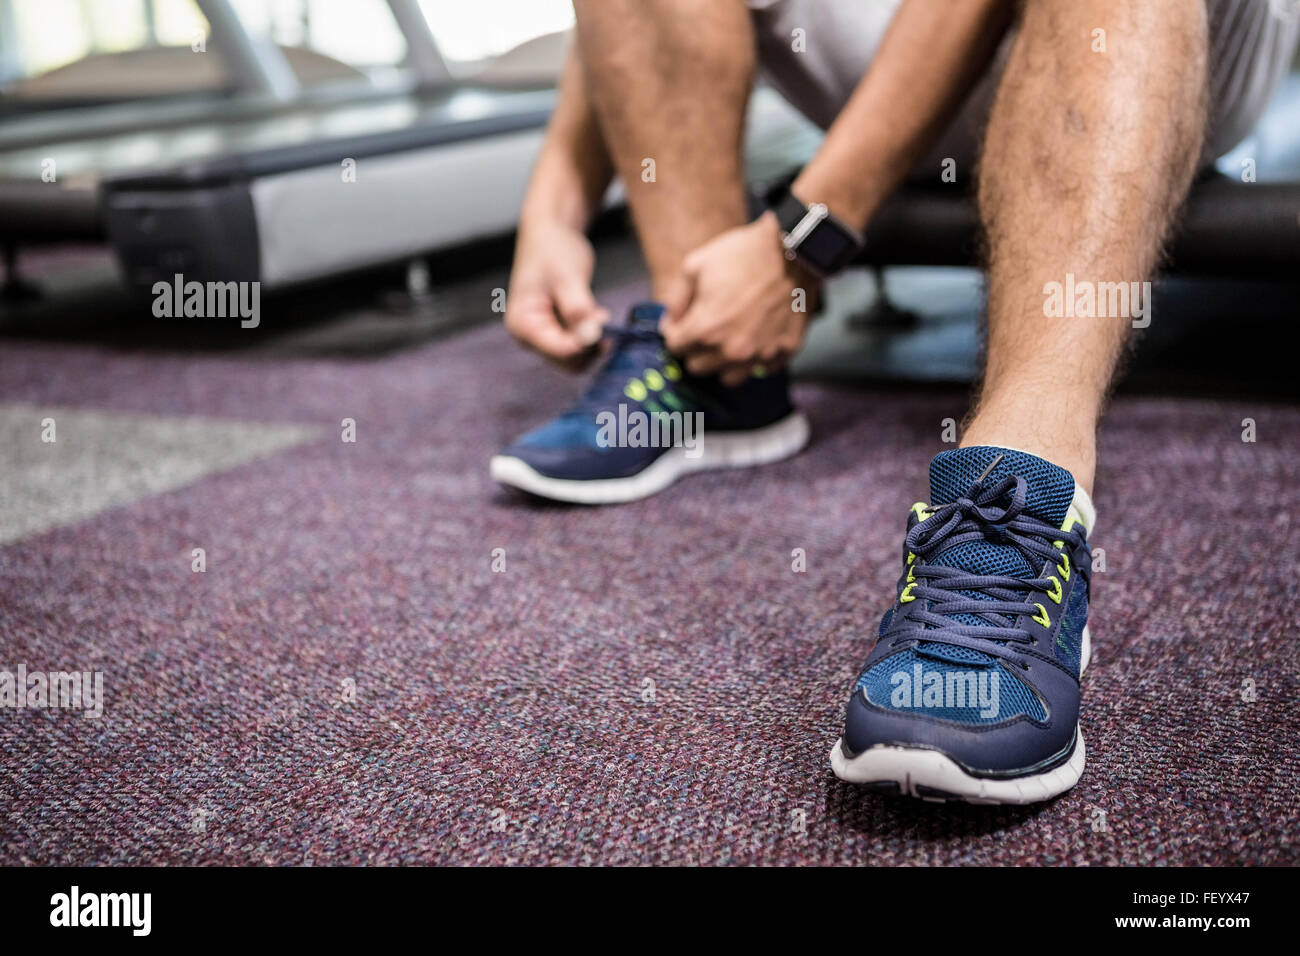 Lower section of man sitting on treadmill and tying the shoelace Stock Photo